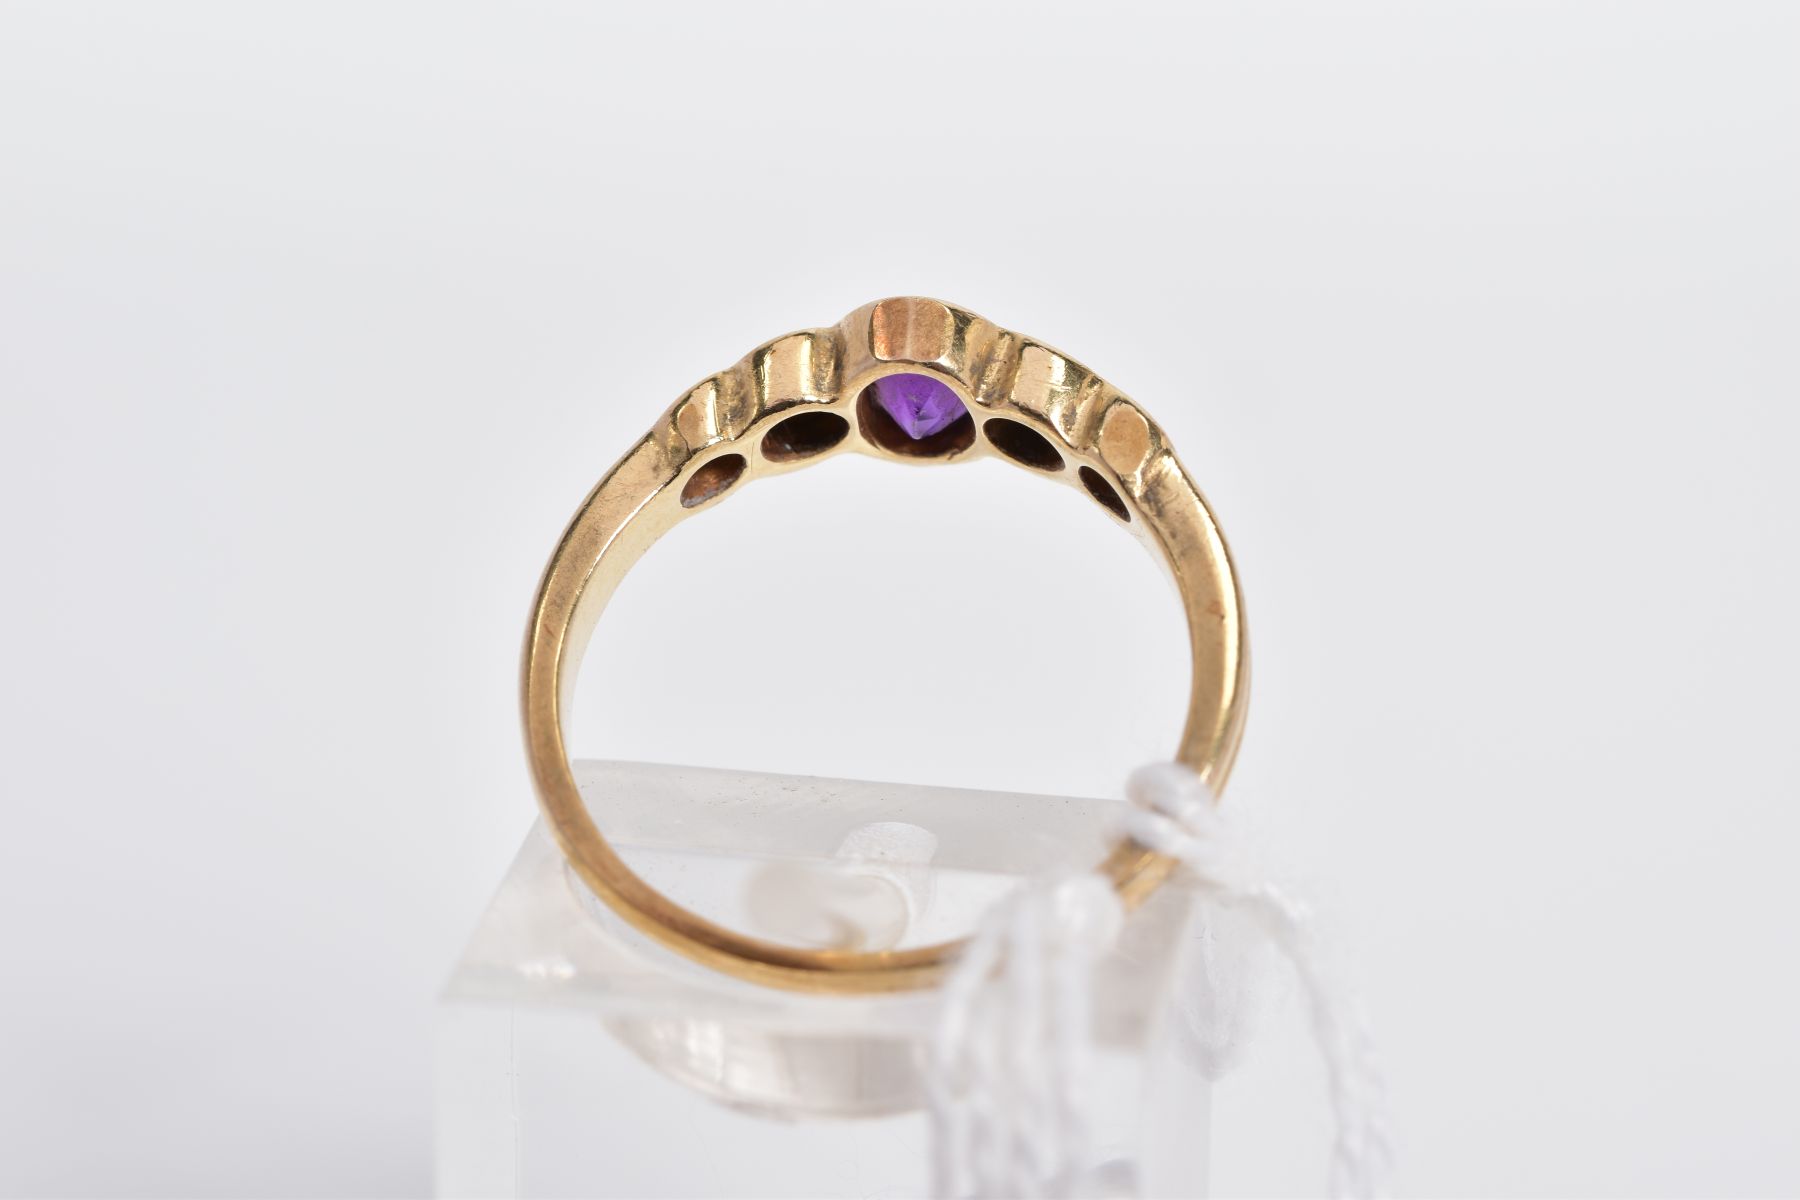 A 9CT GOLD AMETHYST AND DIAMOND RING, designed with a central oval amethyst in a collet setting with - Image 3 of 3